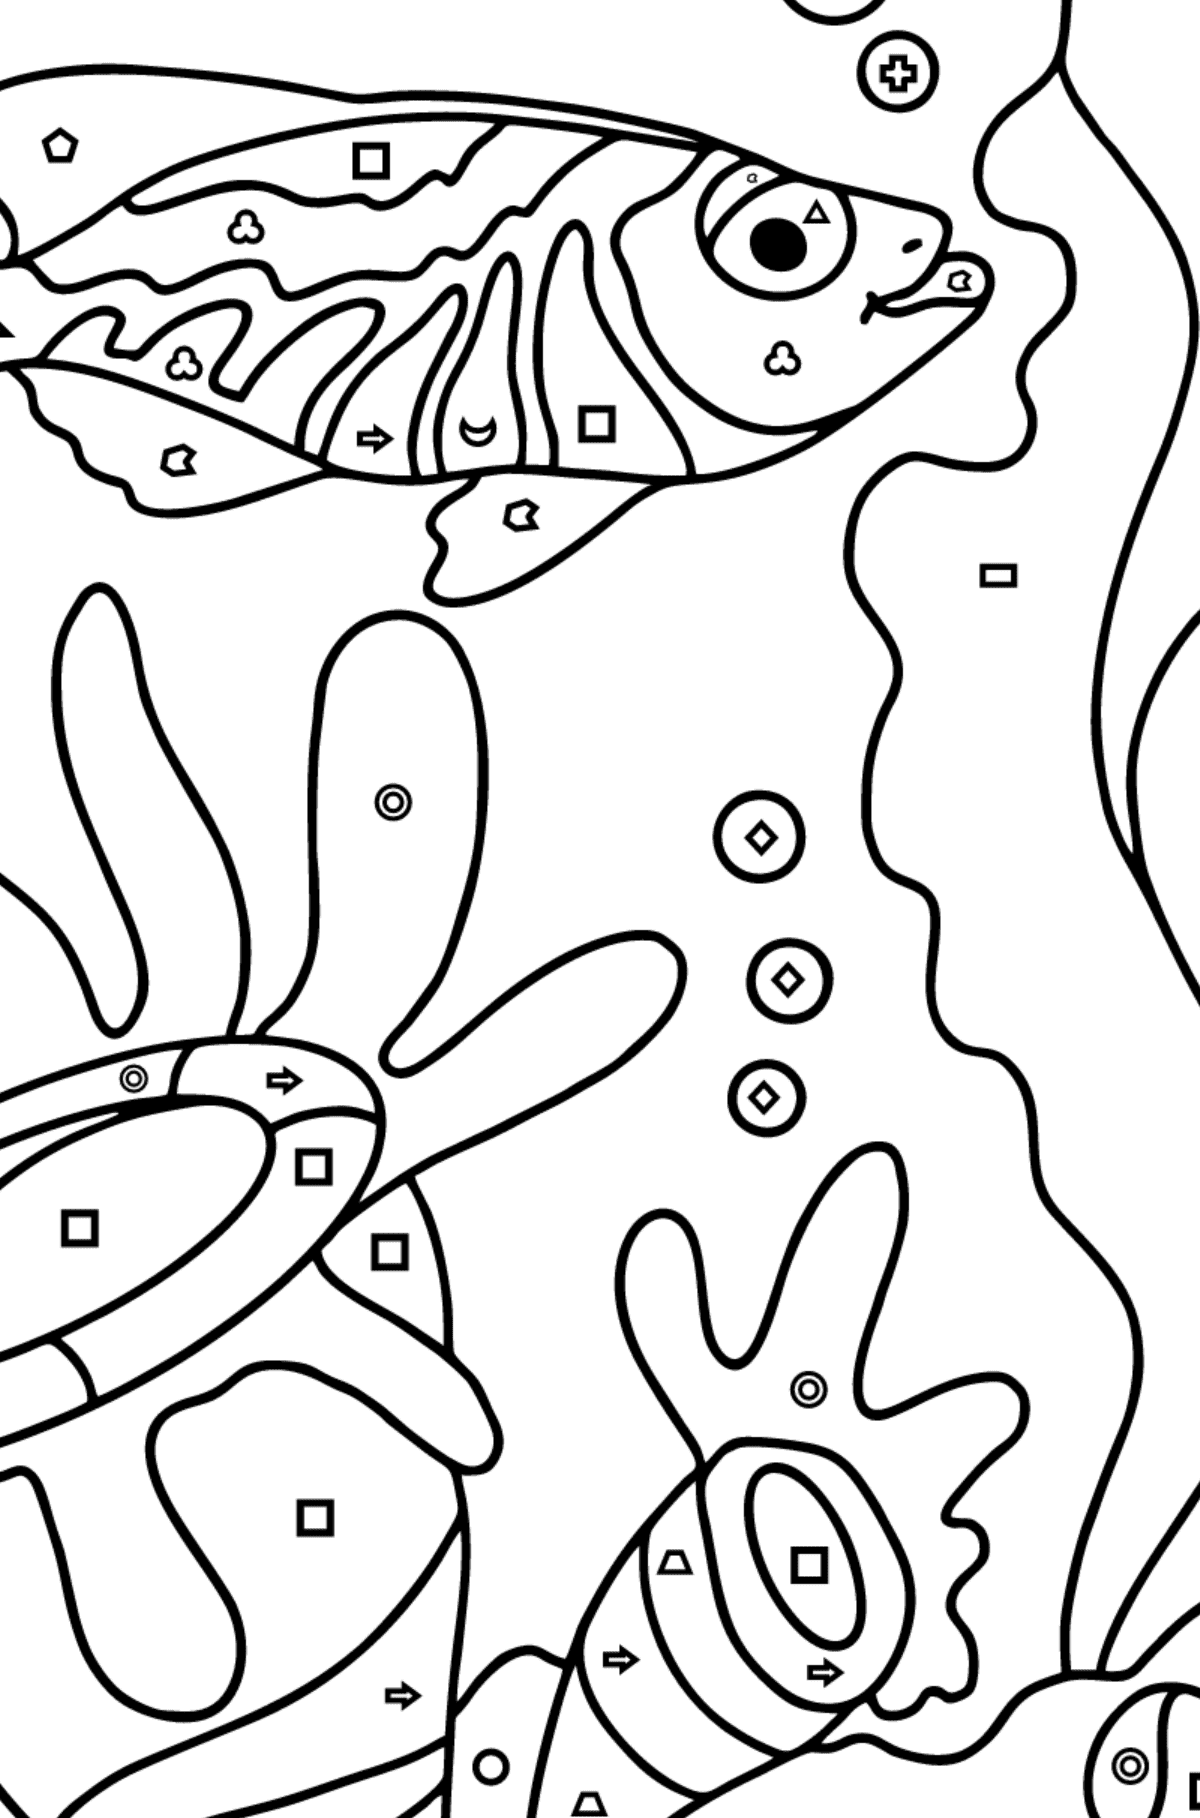 Coloring Page - A Fish is Swimming past the Corals - Coloring by Geometric Shapes for Children